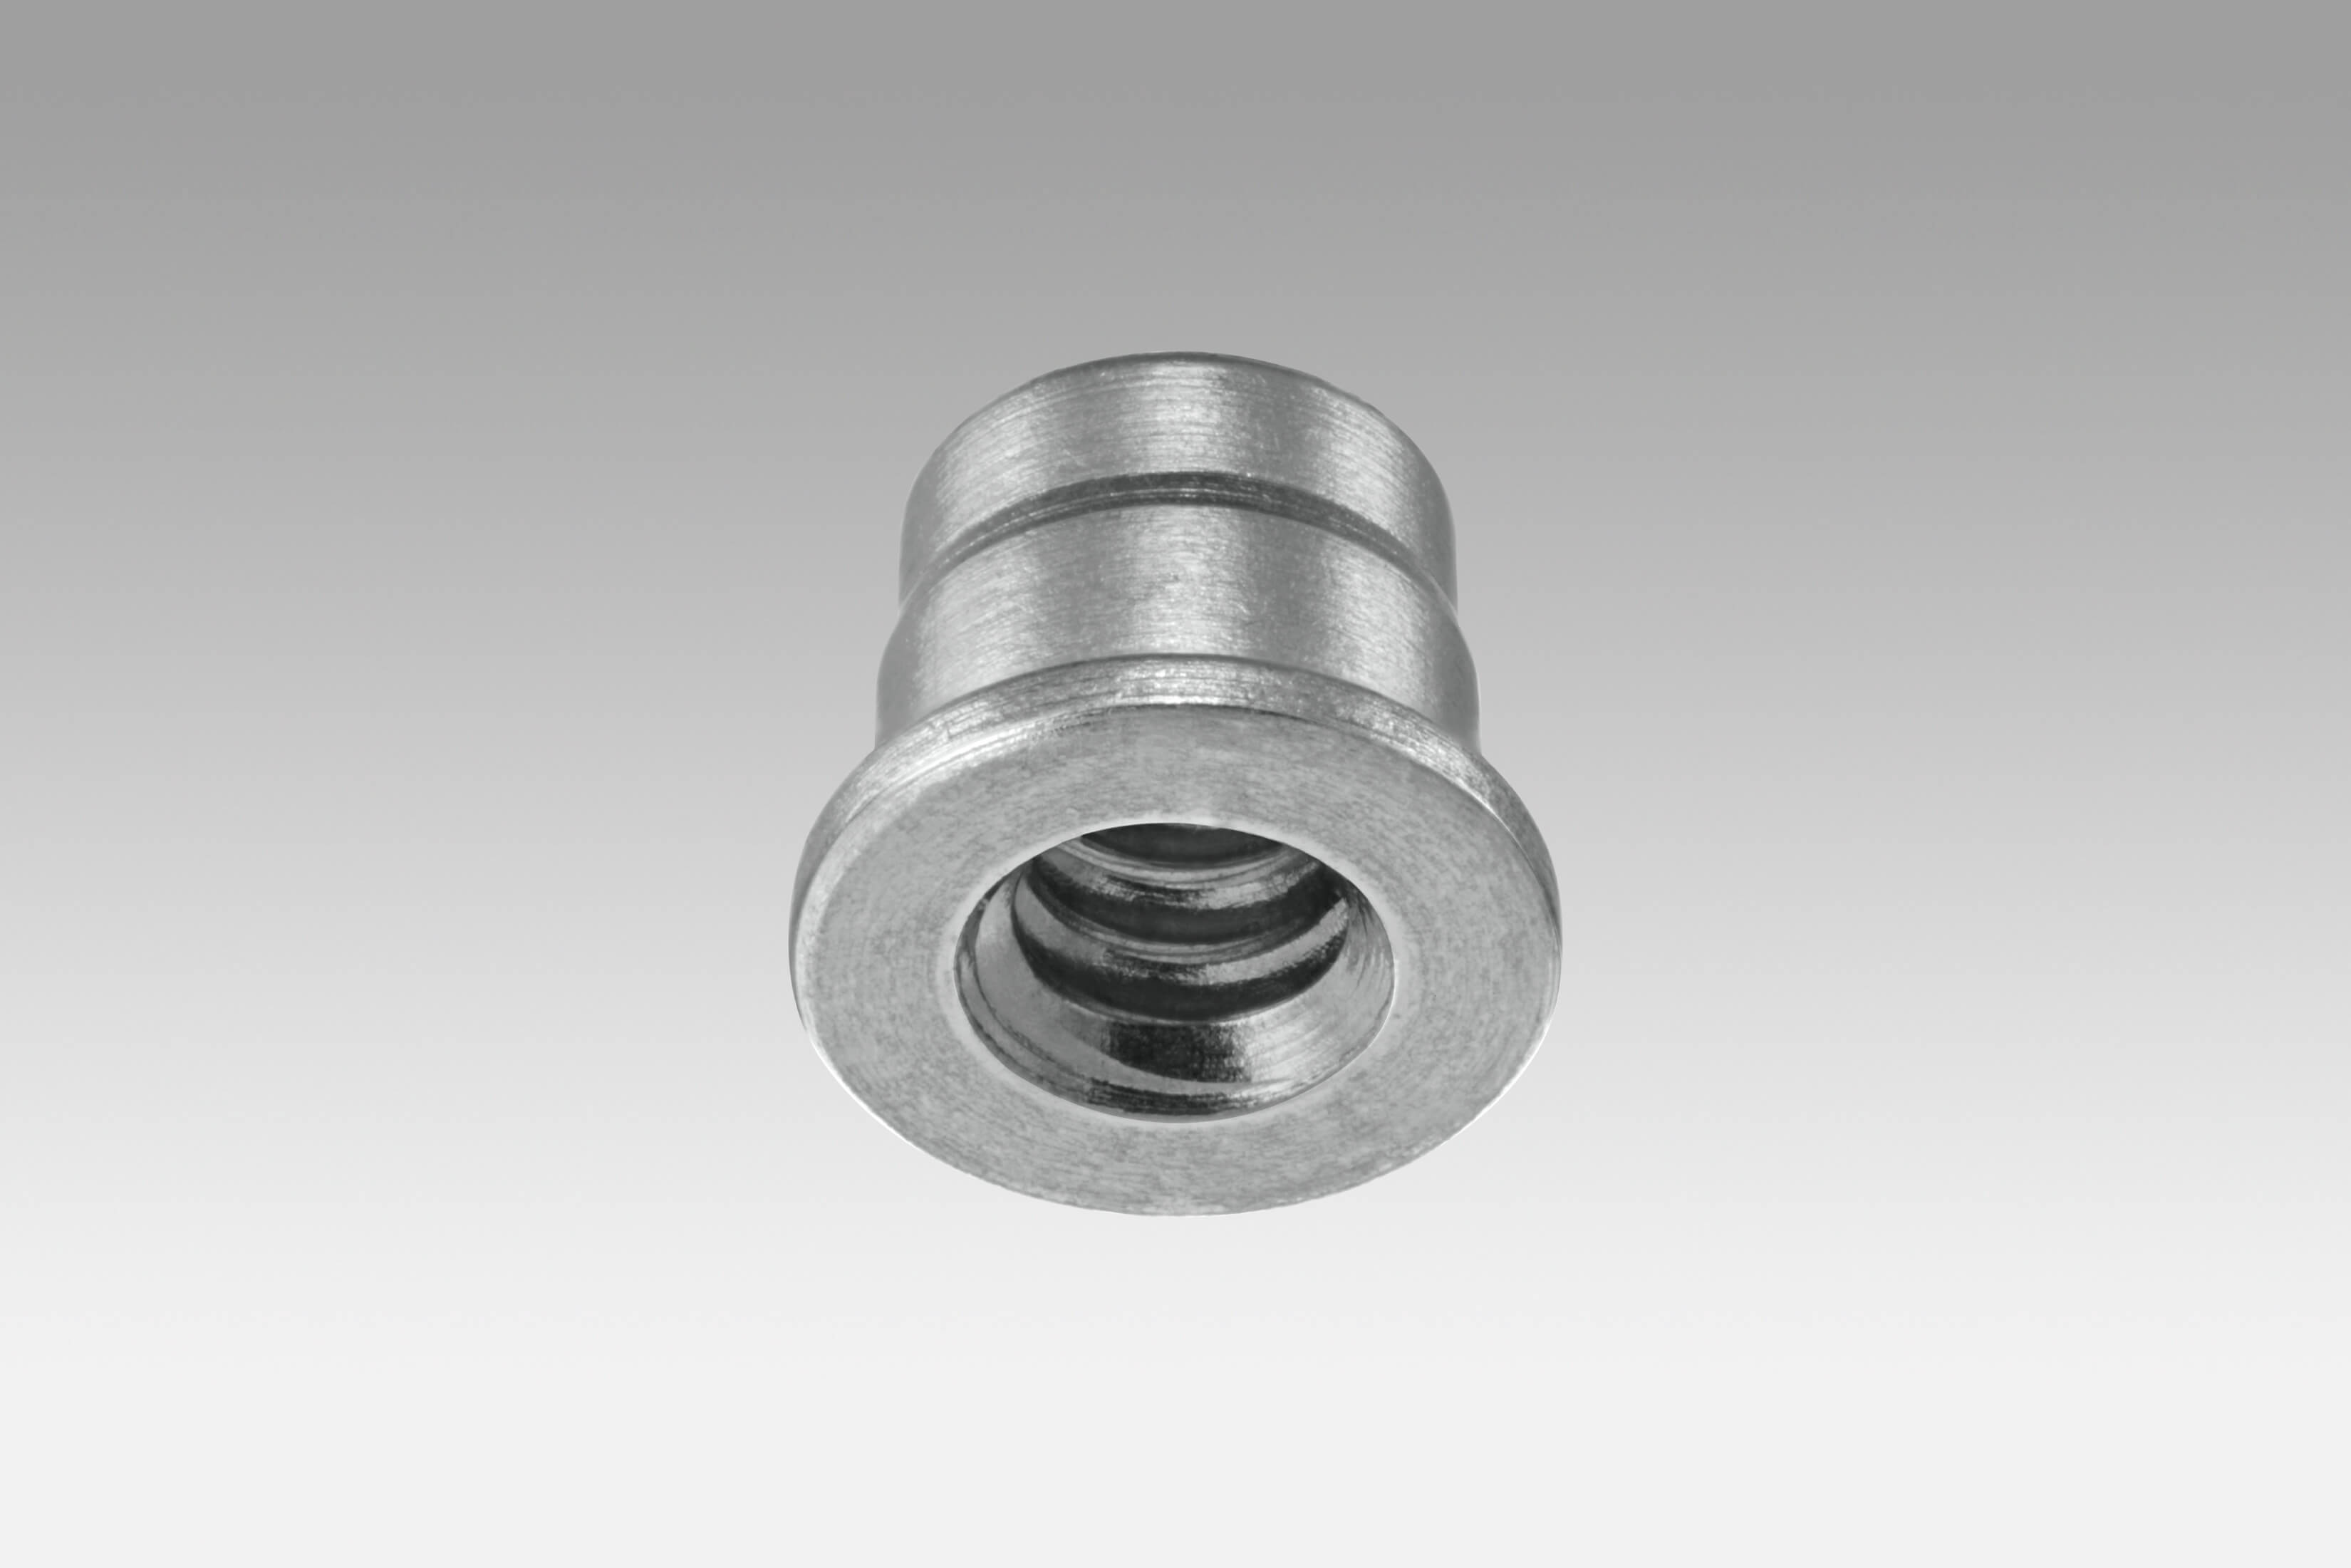 : Foot screw, journal - Swiss supplier and manufacturer of micro-parts for watchmaking